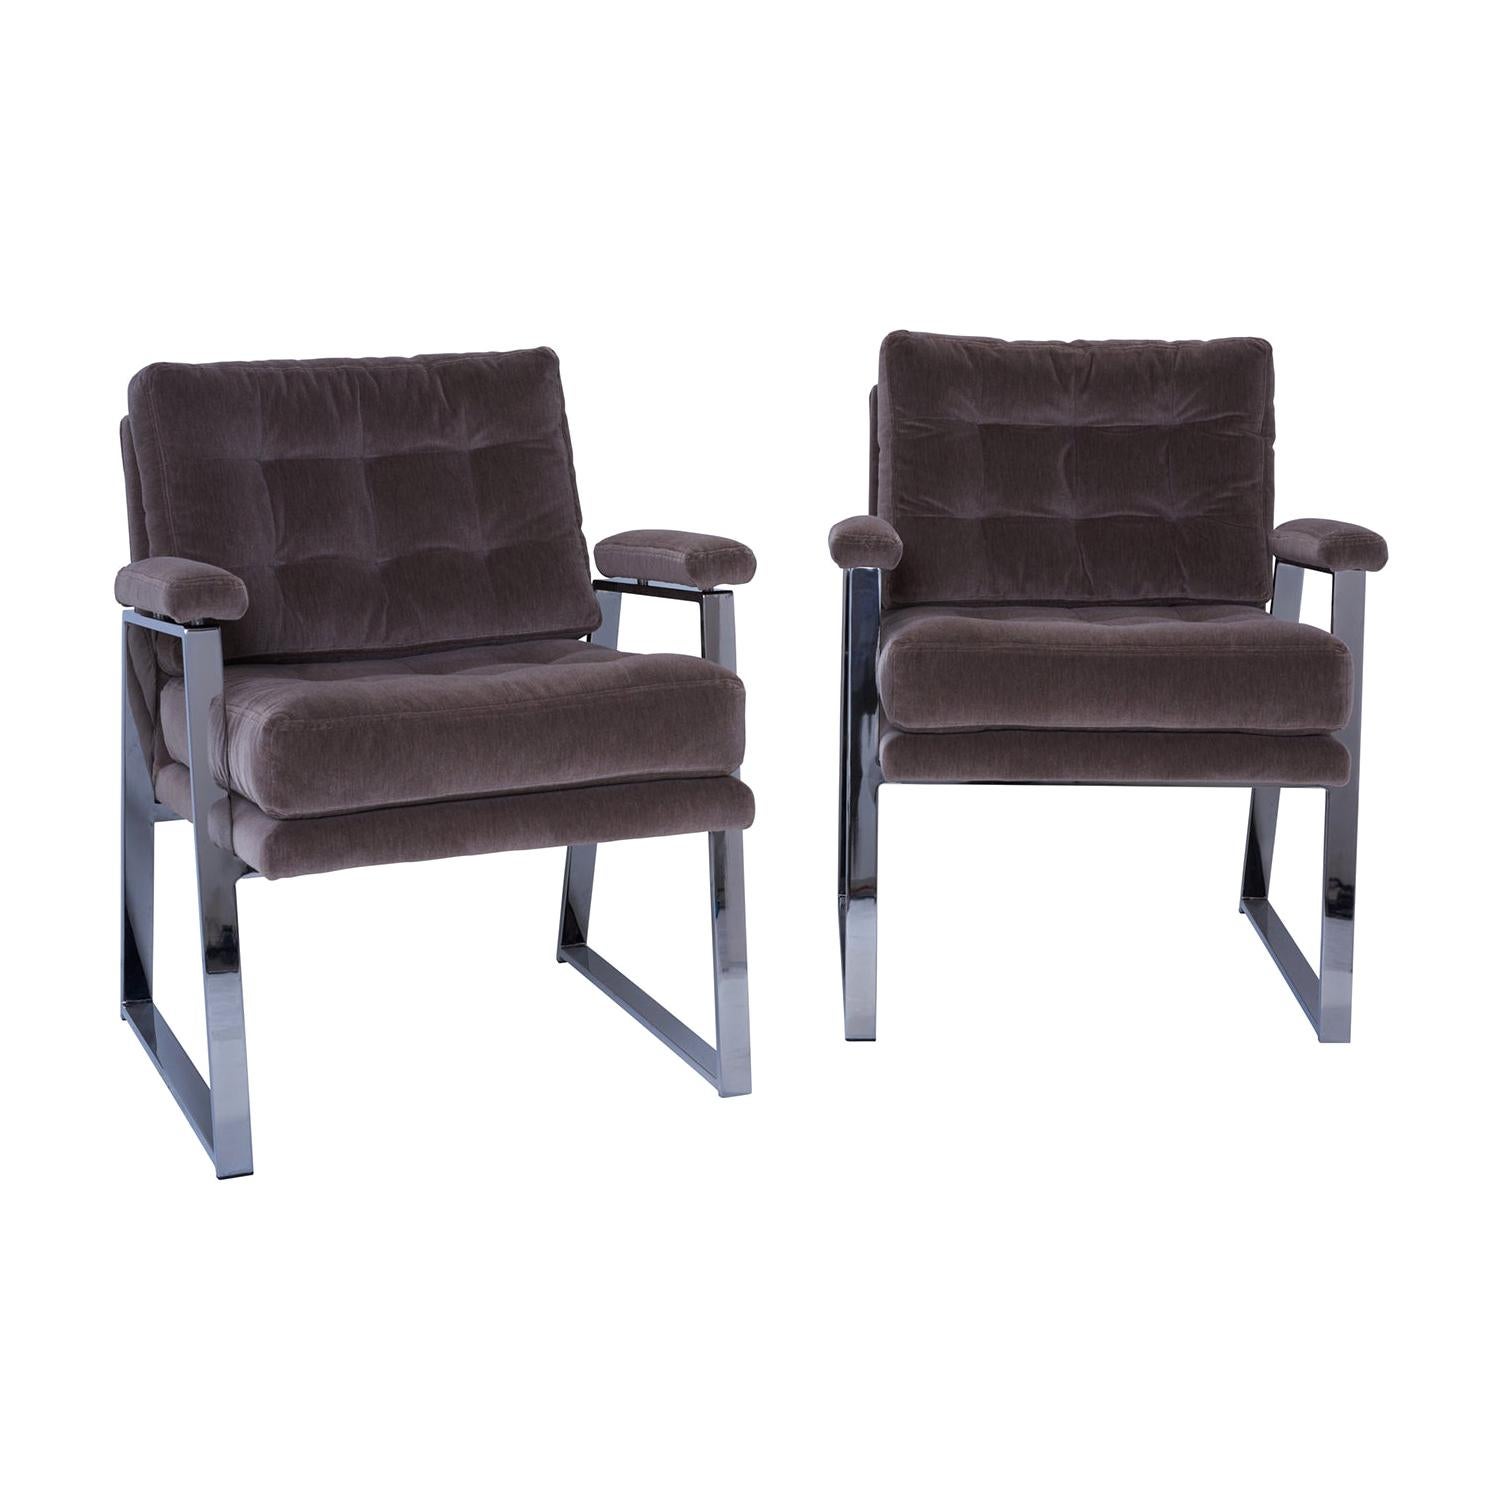 Pair of Newly Upholstered Vintage Midcentury Tufted Chairs with Chrome Base